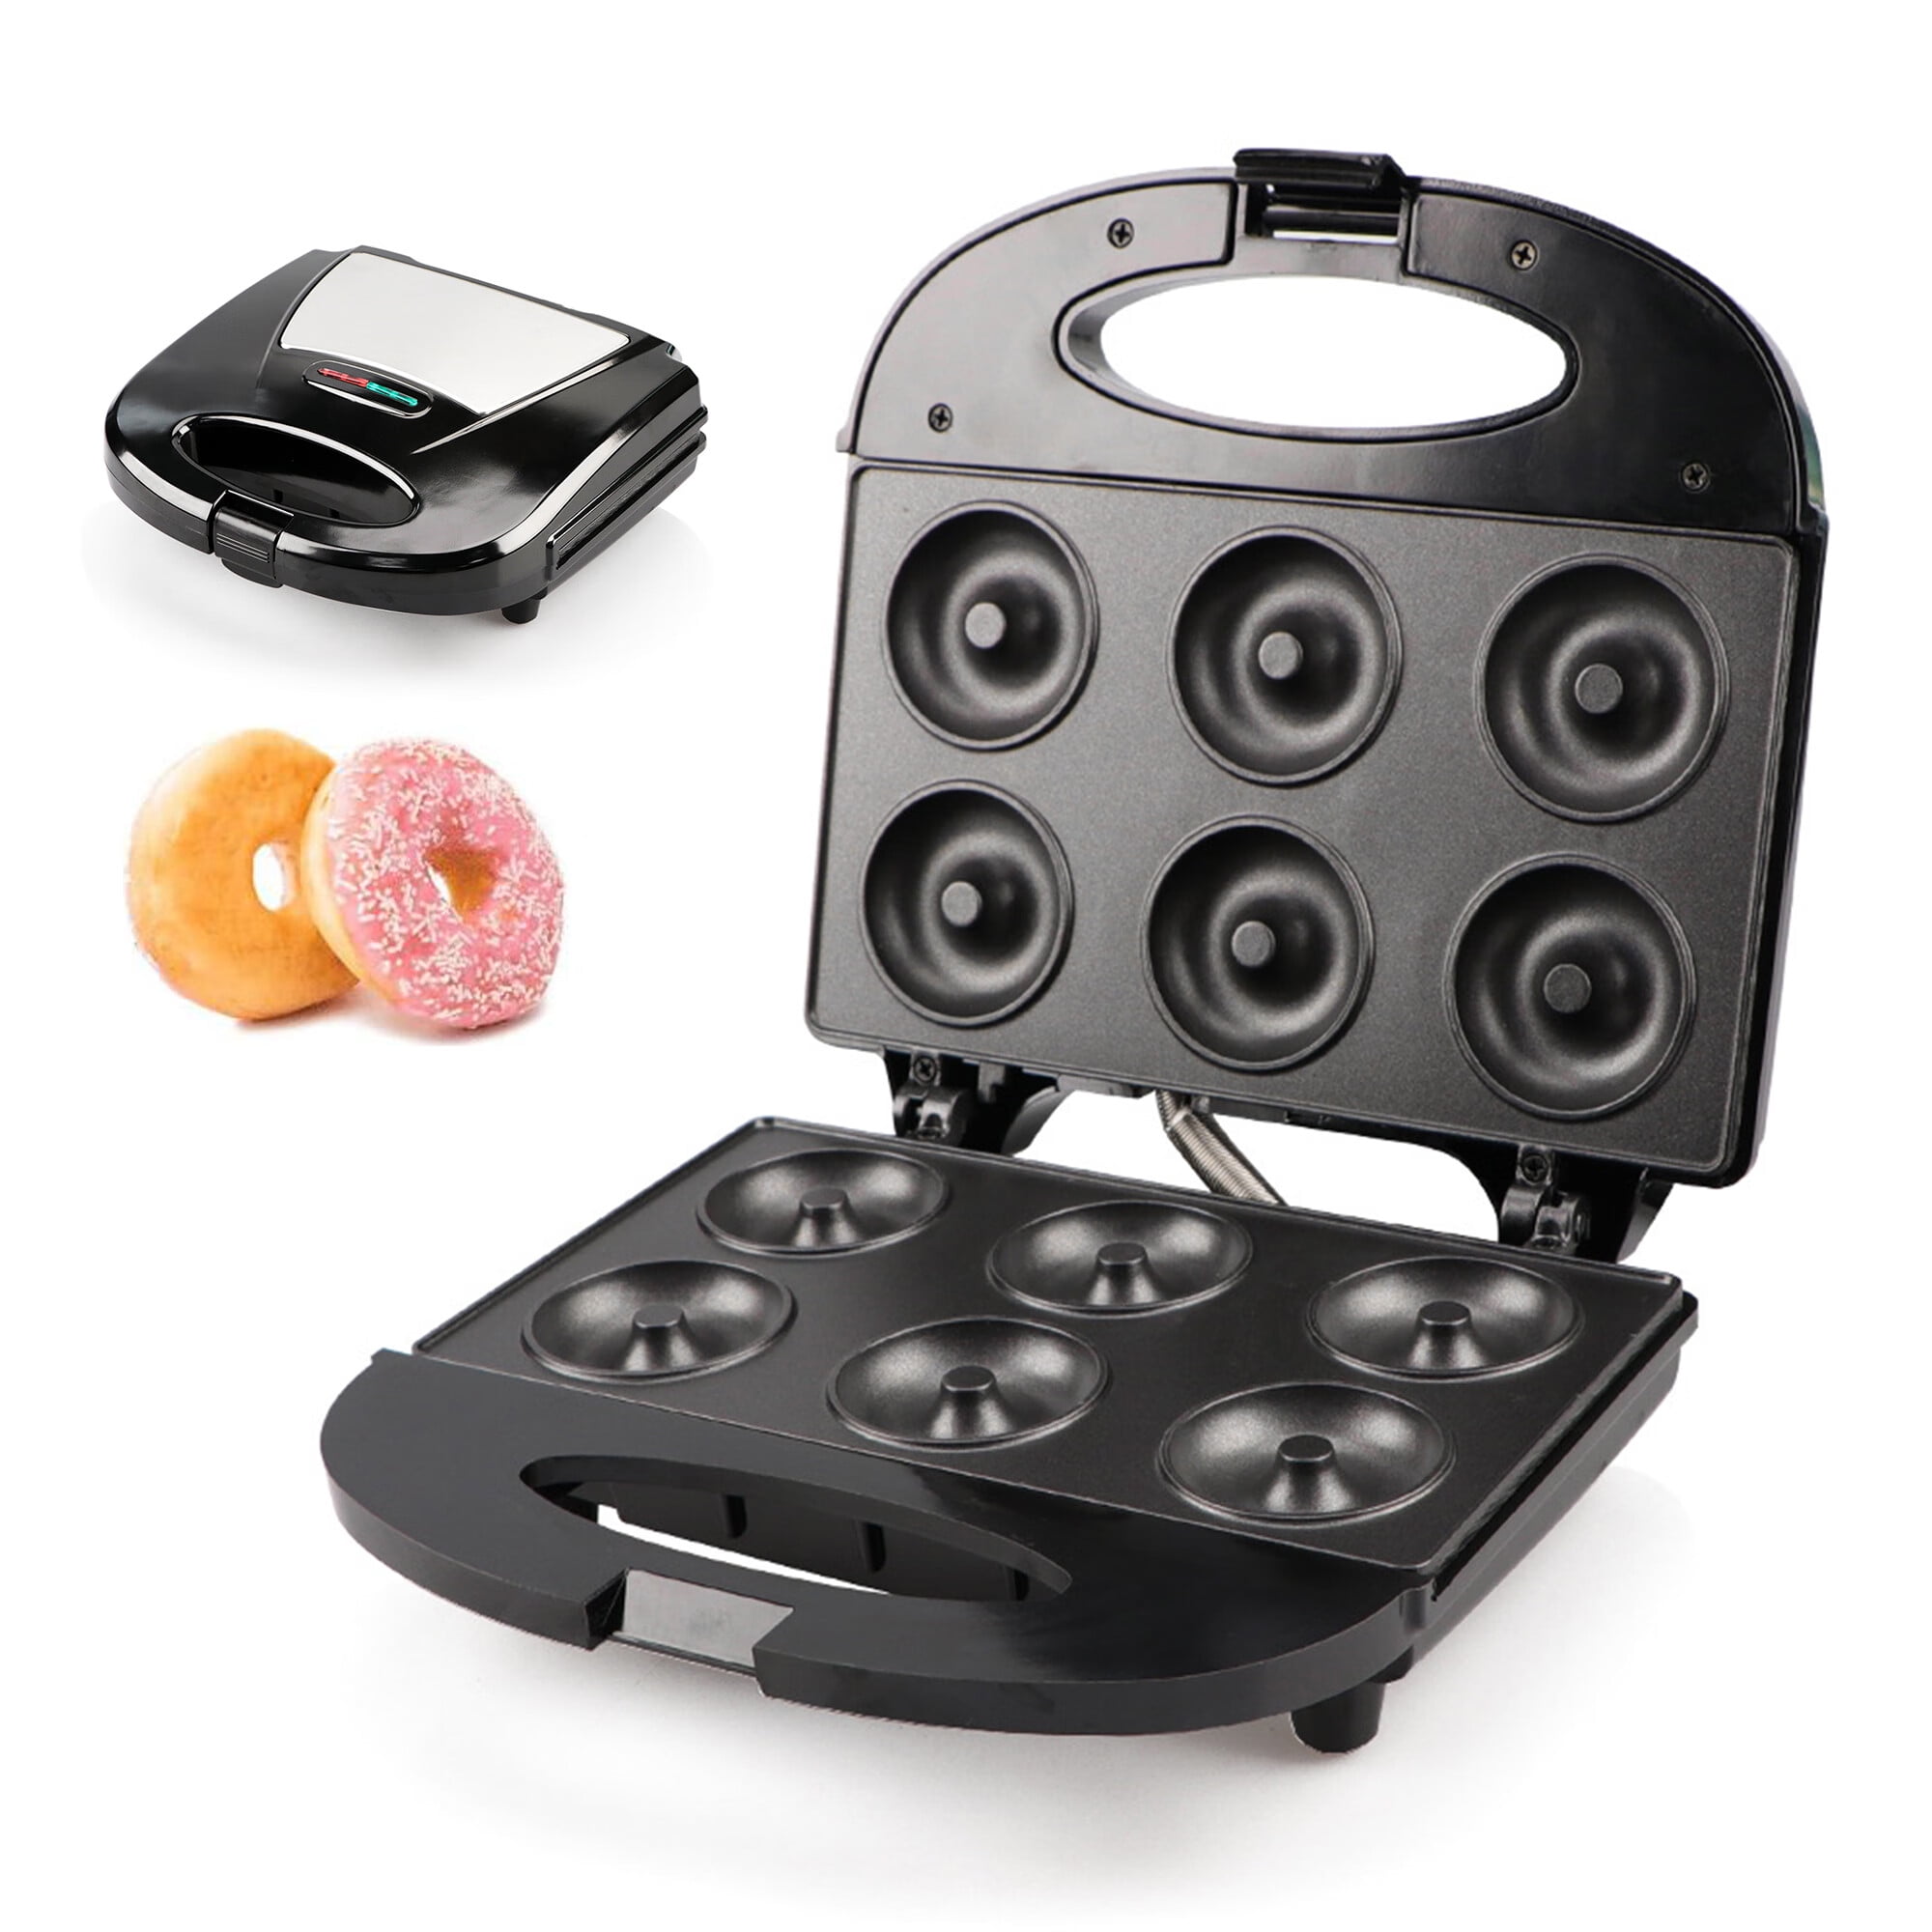 Mini Donut Maker Machine for Home, 550W Heating Makes 3 Doughnuts with  Non-Stick Surface for Kid Breakfast, Snacks, Desserts - AliExpress